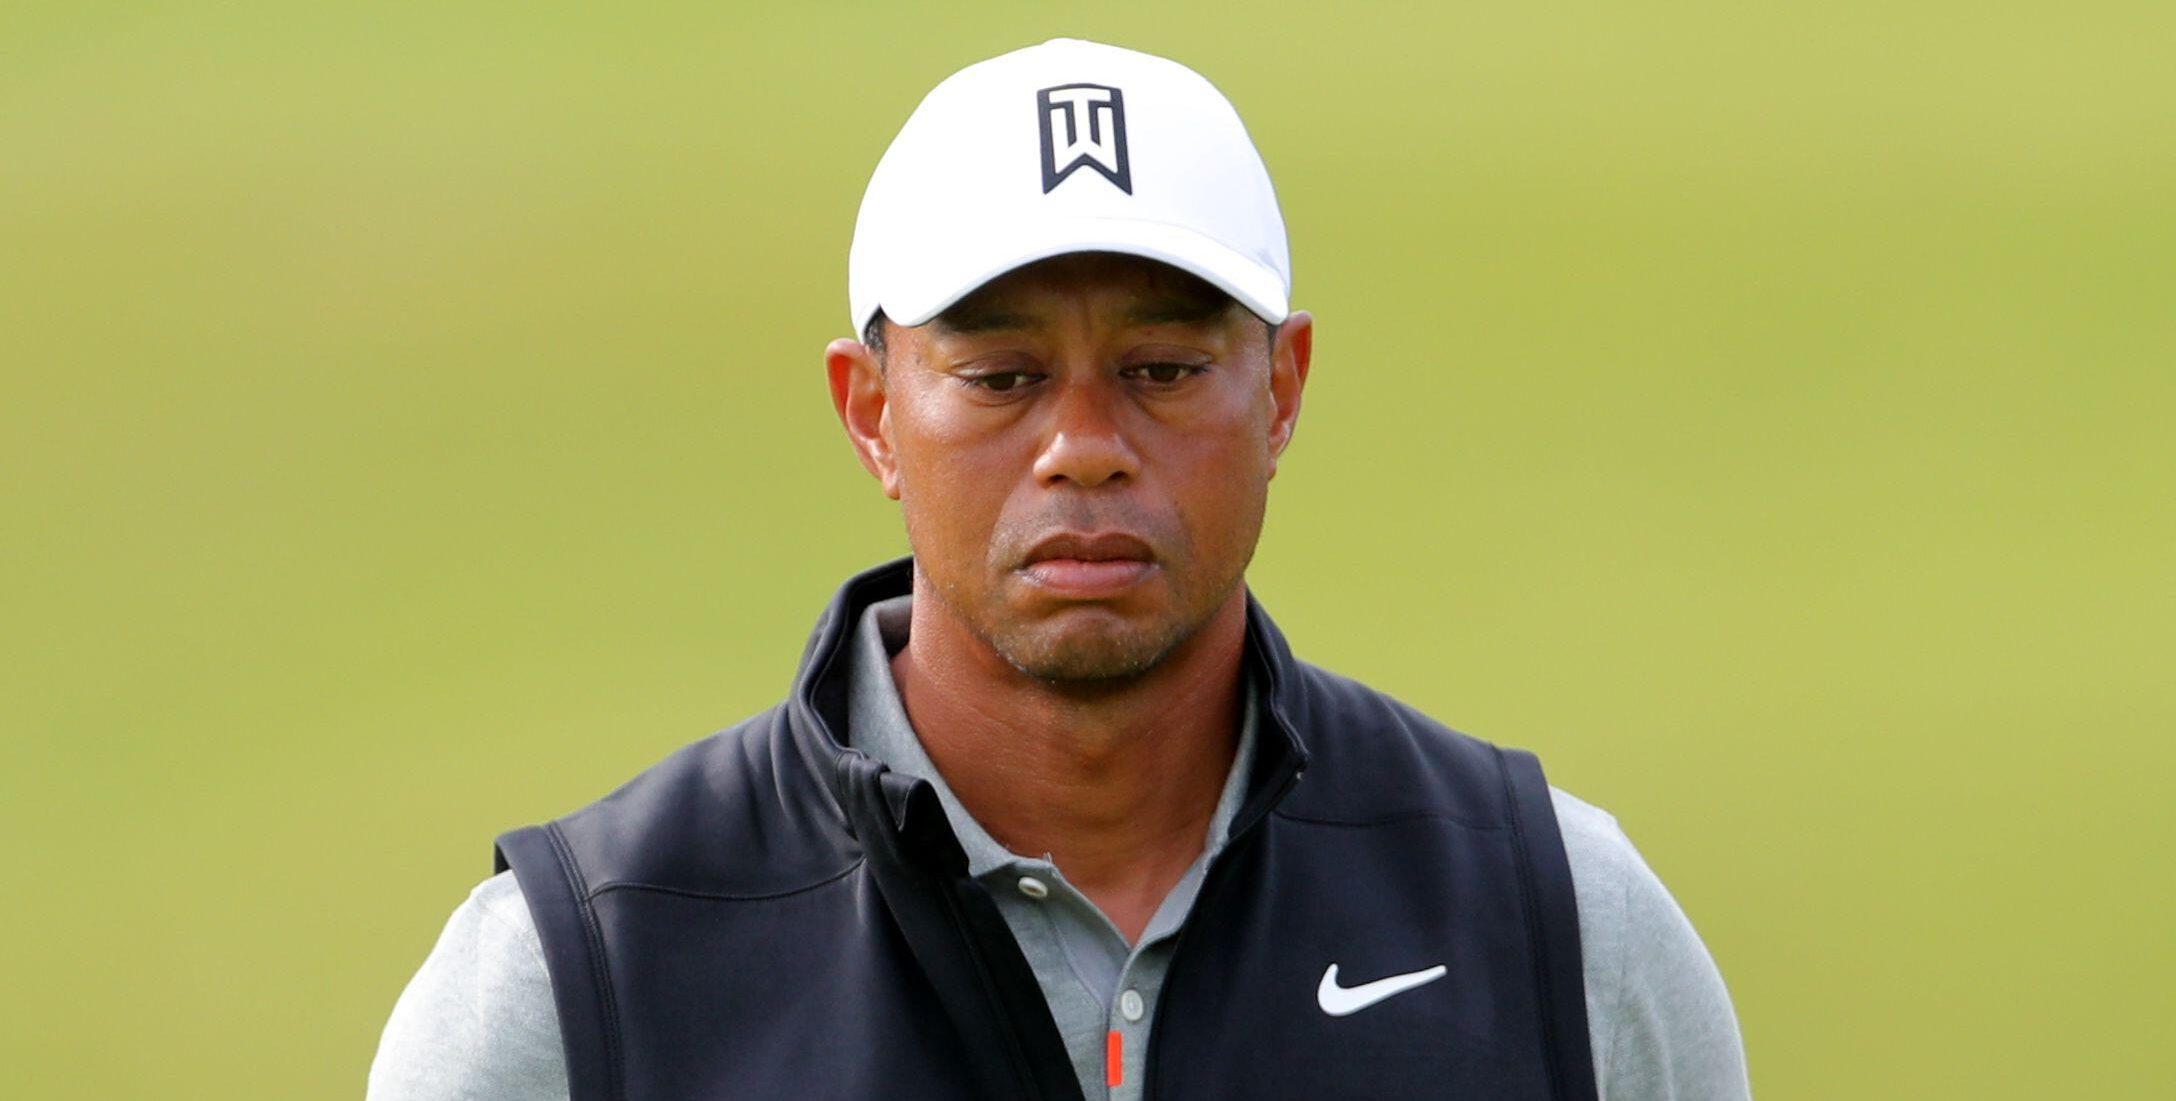 Tiger Woods says he won't return full-time and feared losing leg ...